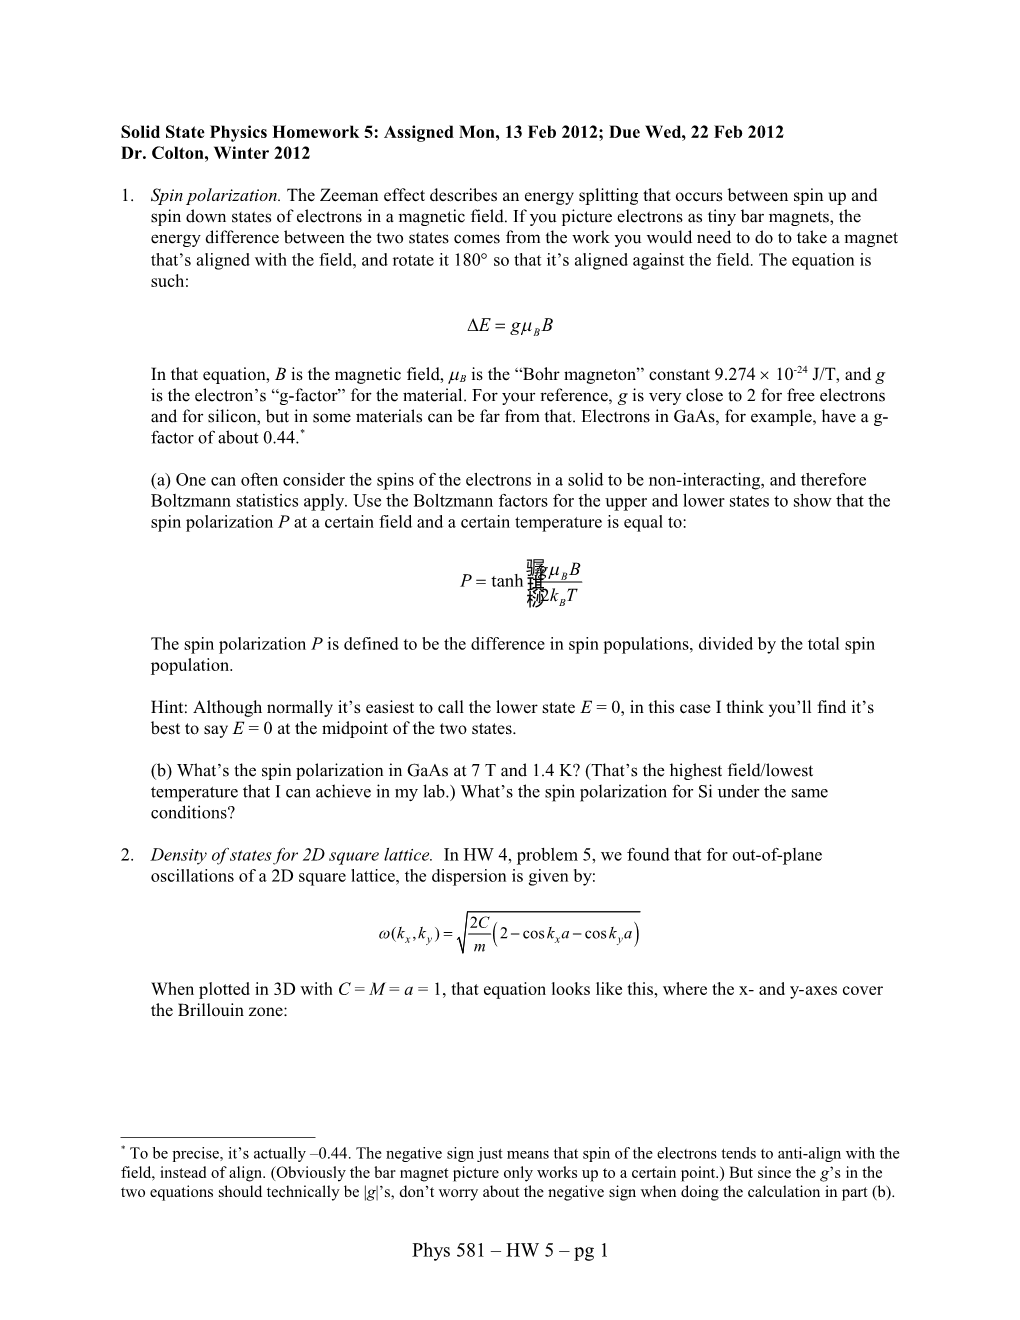 Solid State Physics Homework 1: Assigned Wed Xxx; Due Wed Xxx